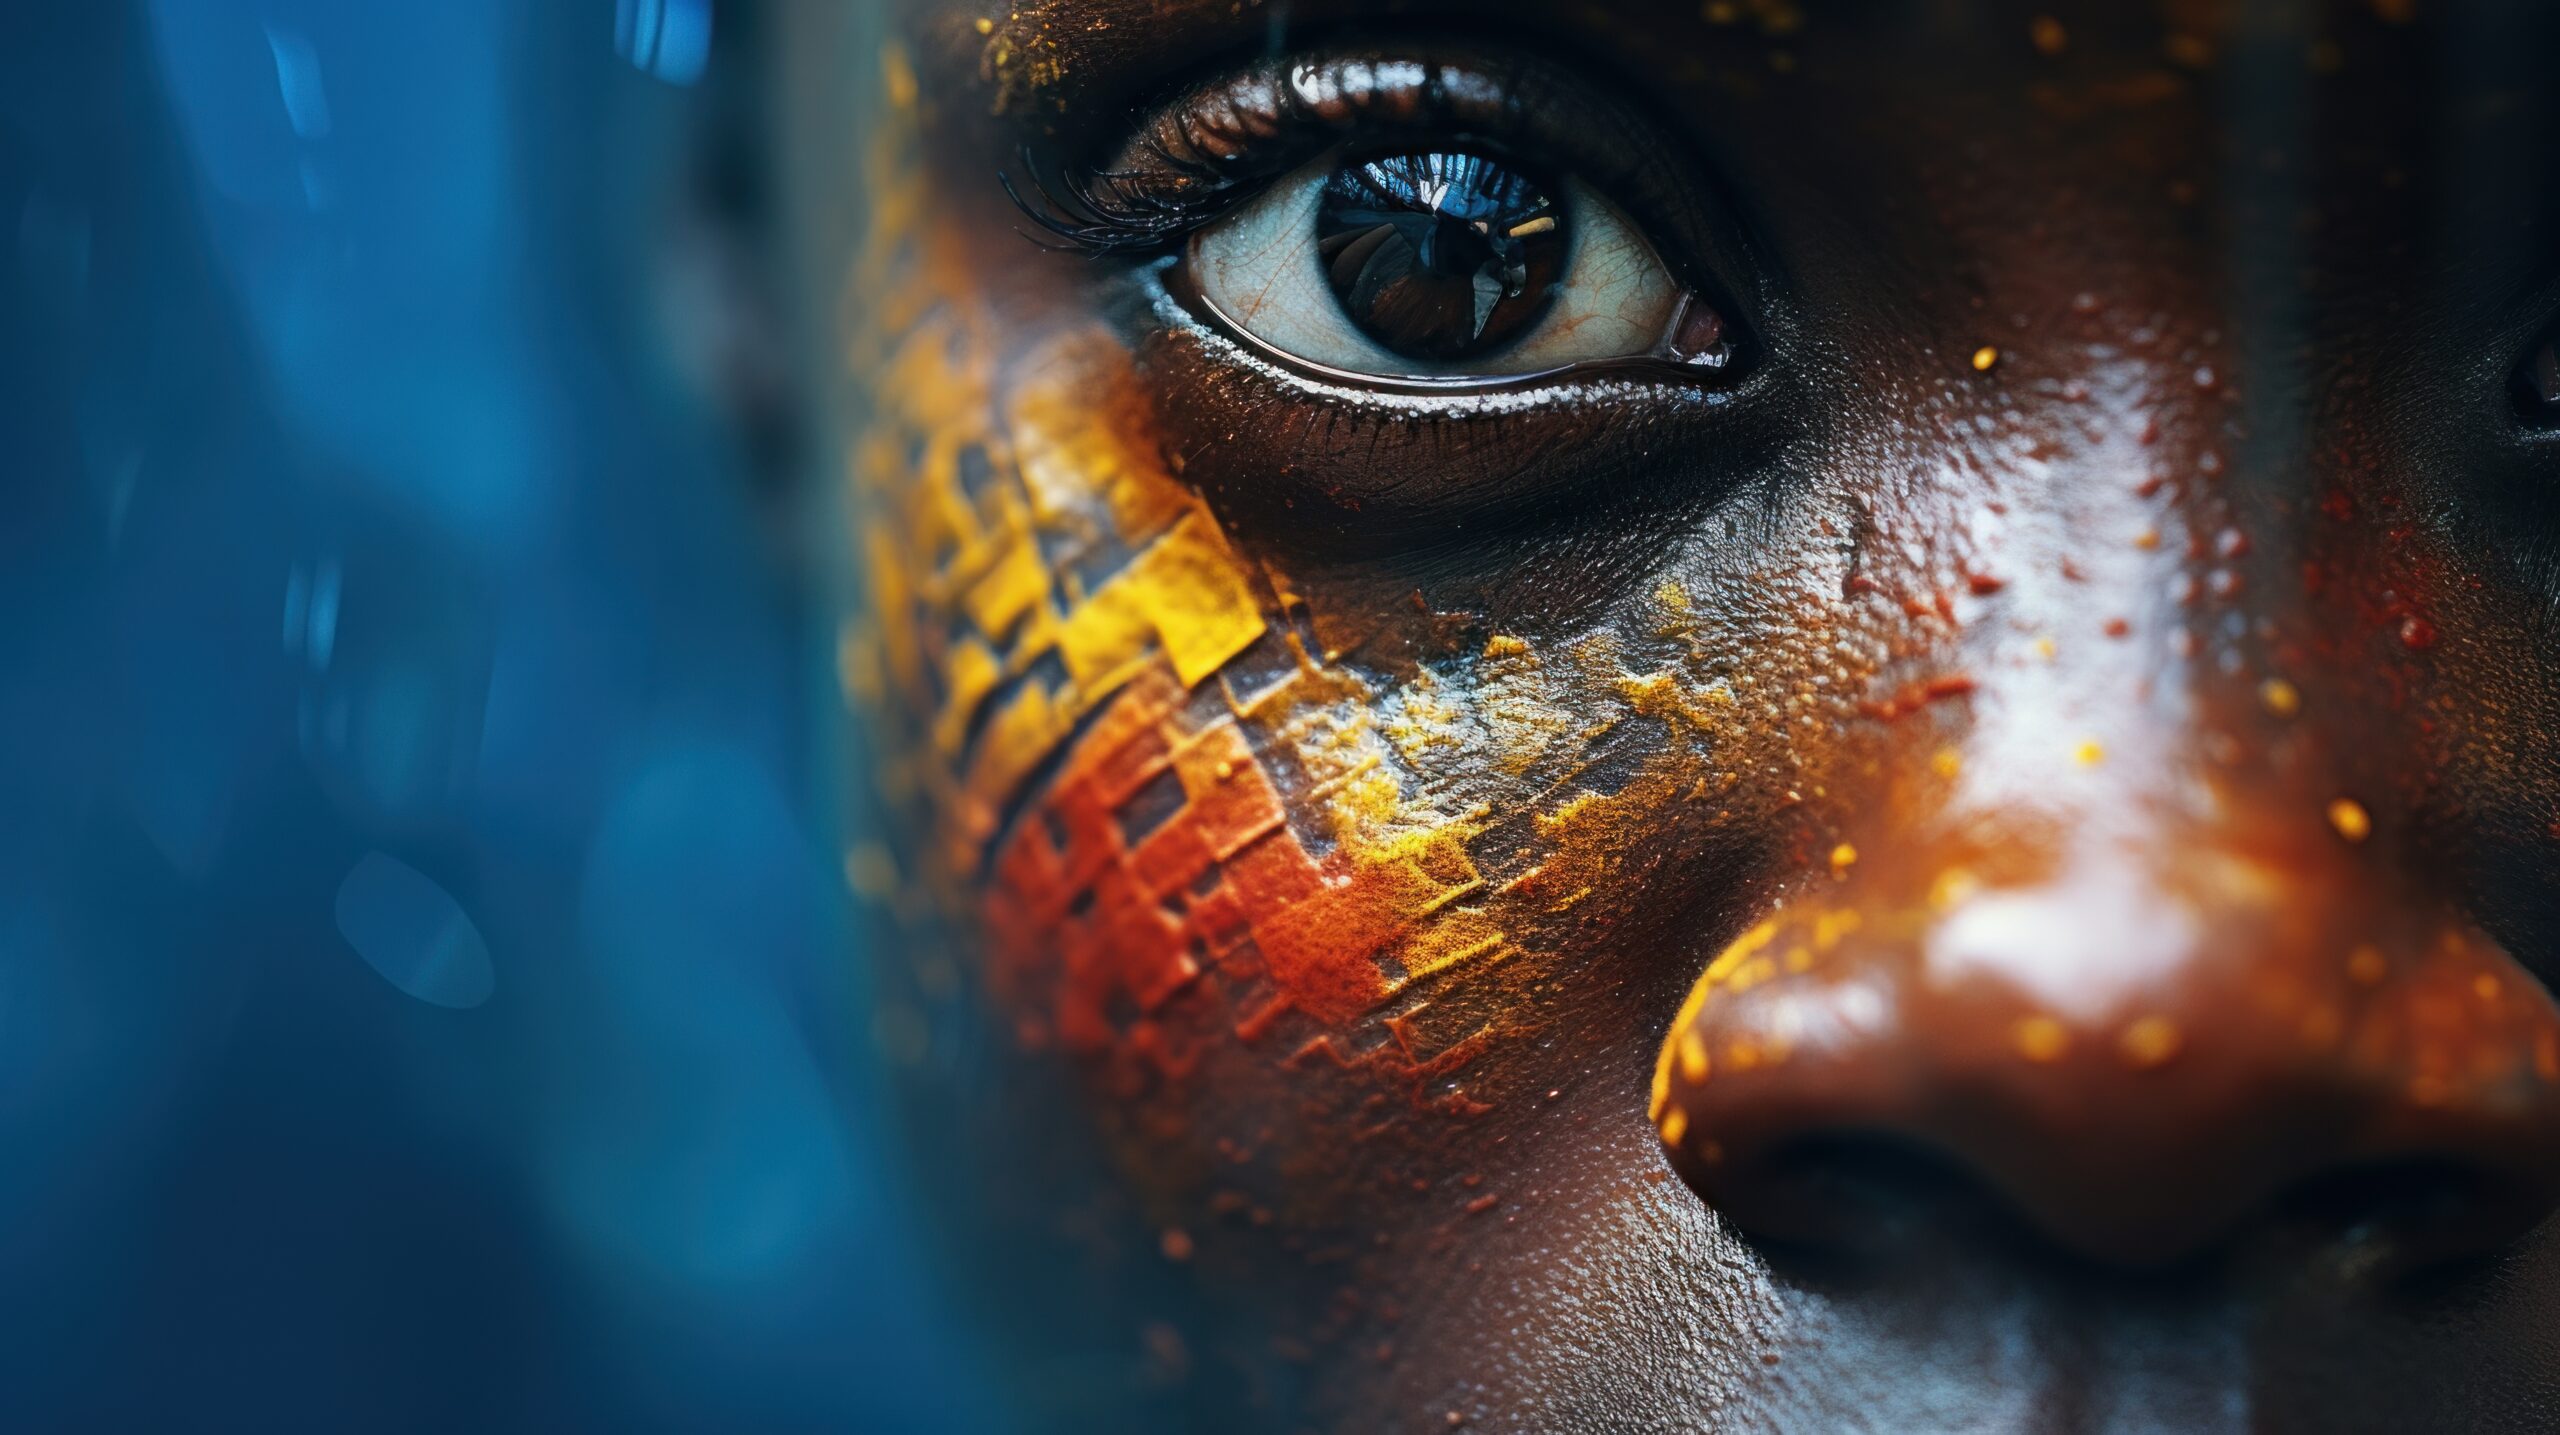 A close up of a young girl's face with paint